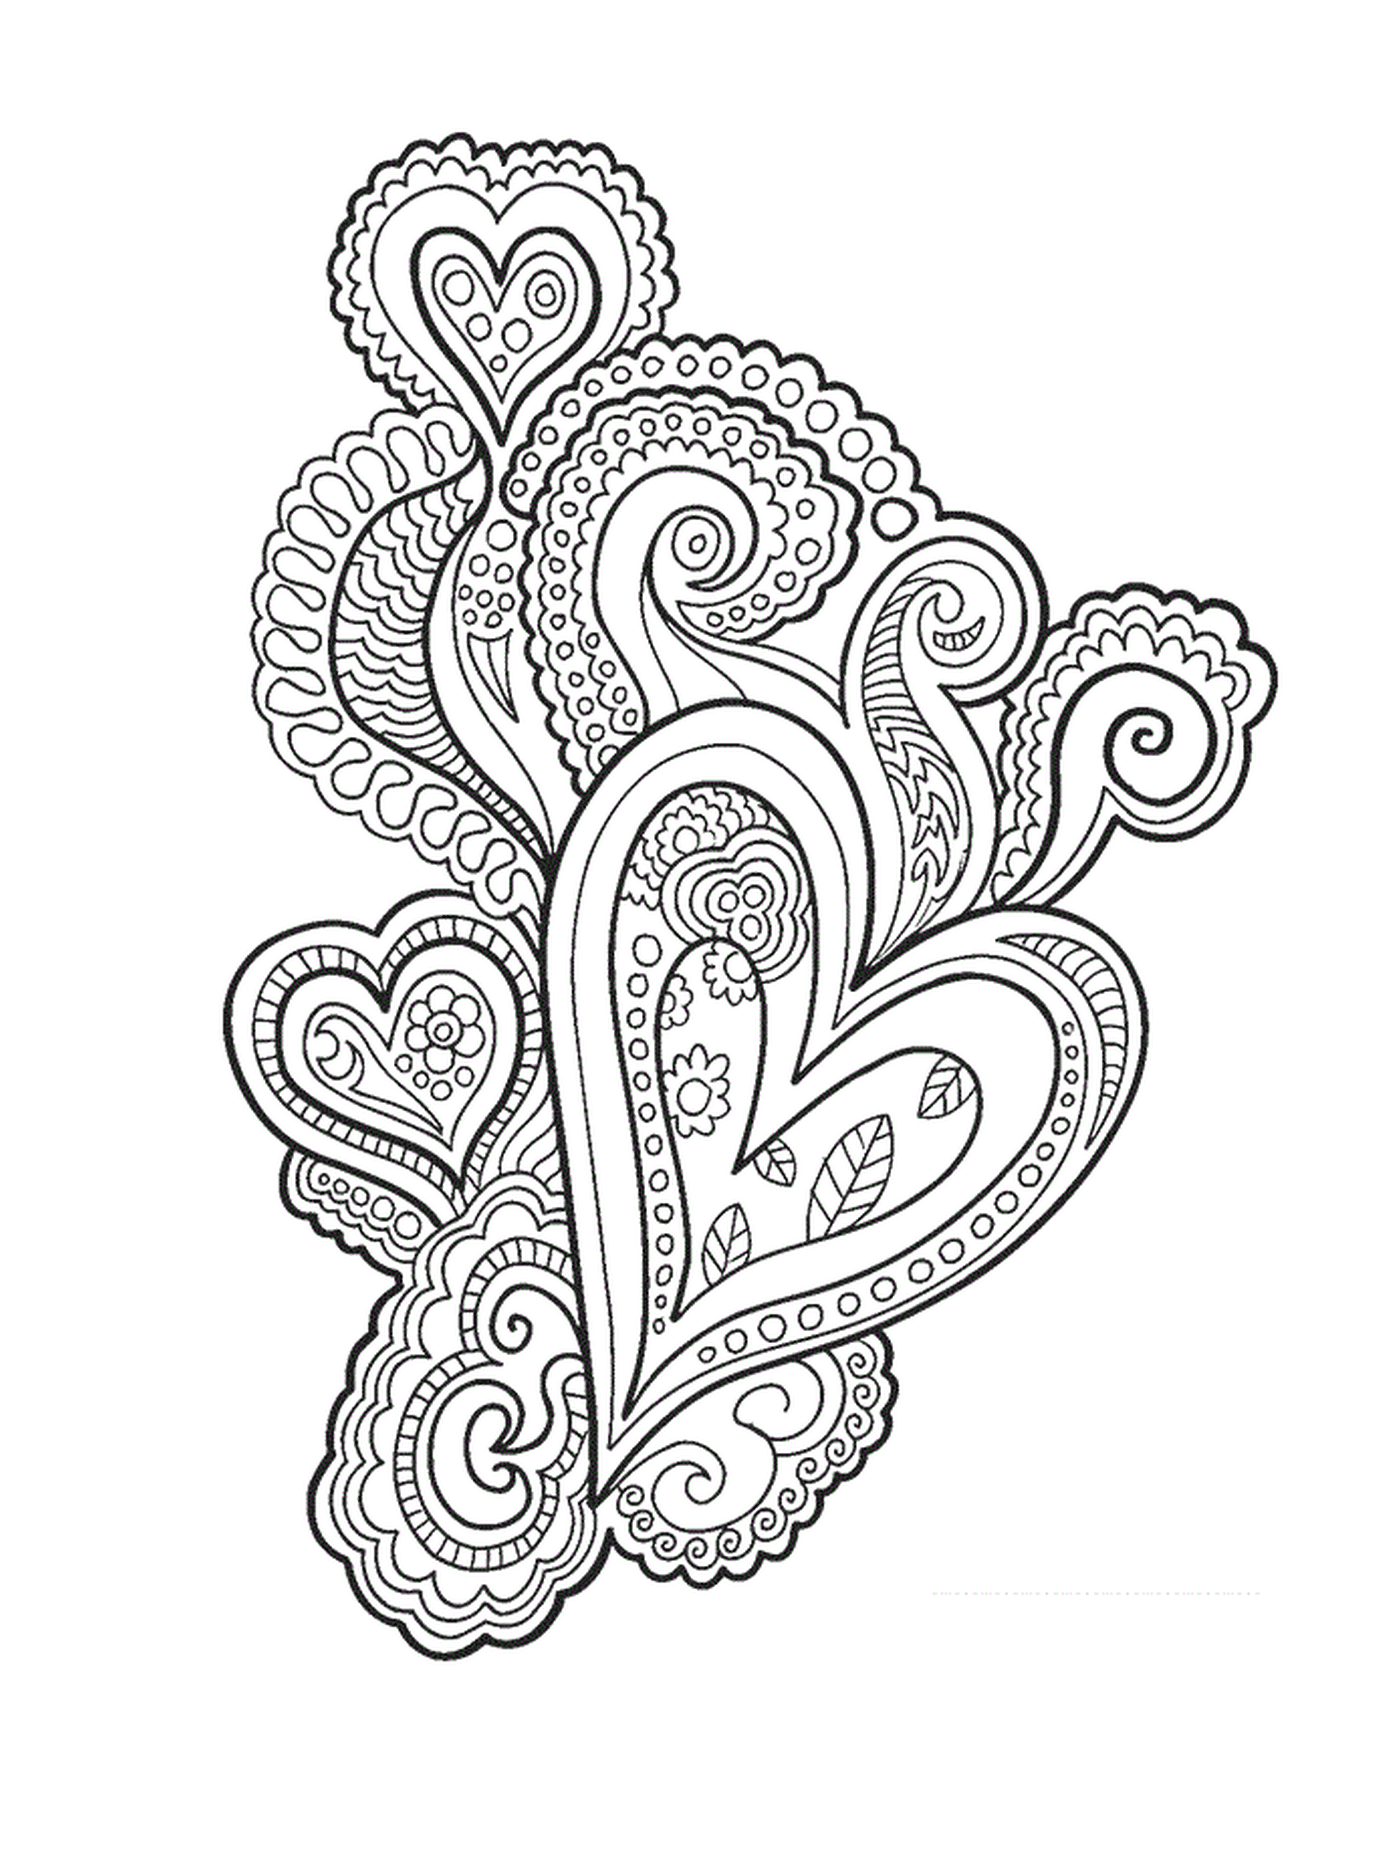  Love and serenity in a mandala of heart 